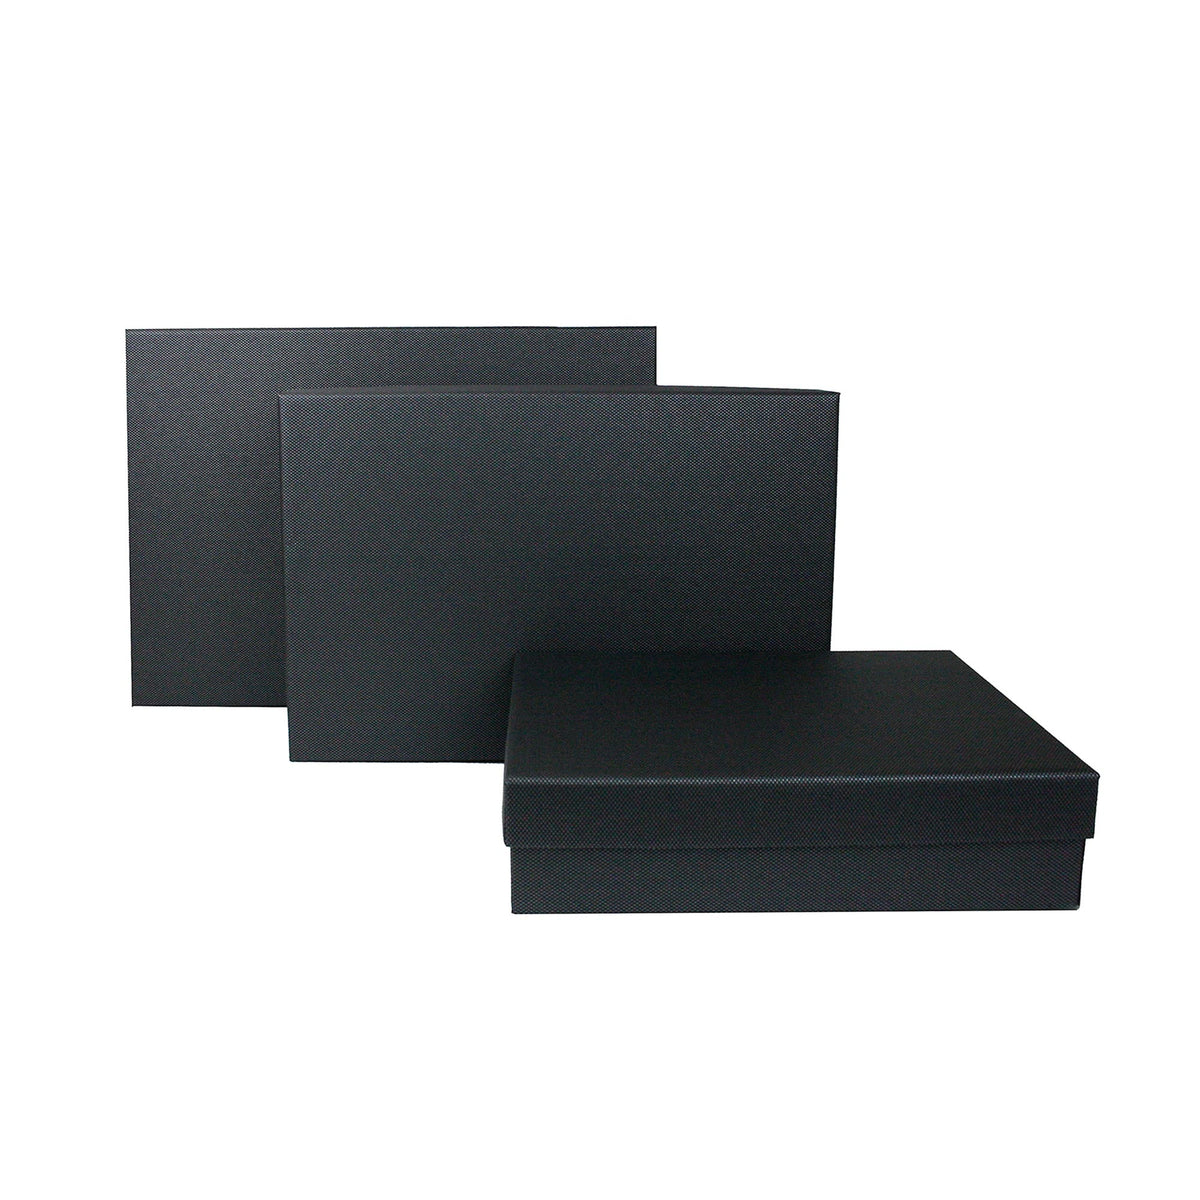 Set of 3 Textured Black Gift Boxes (Sizes Available)